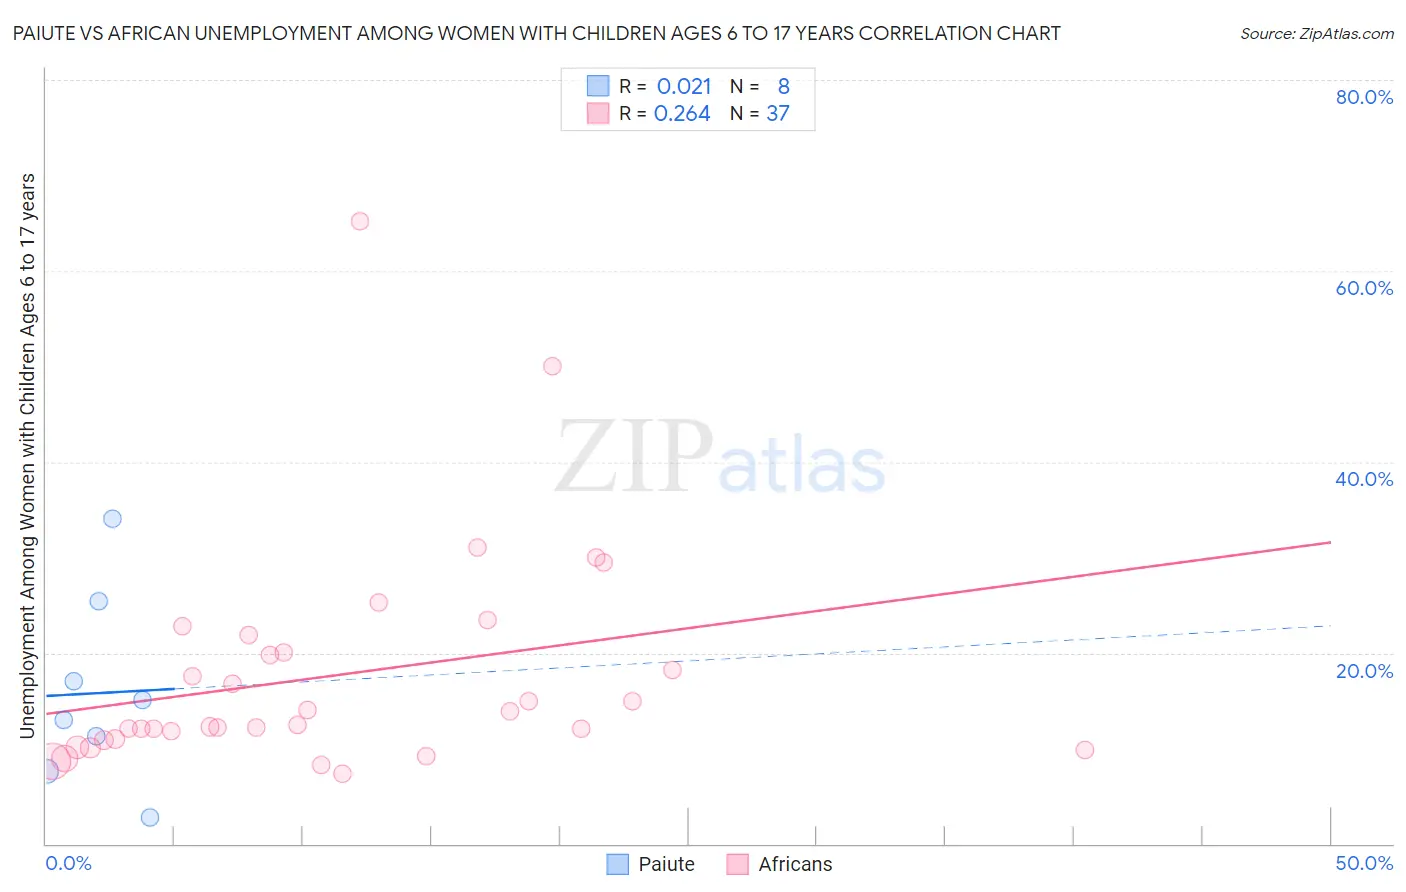 Paiute vs African Unemployment Among Women with Children Ages 6 to 17 years